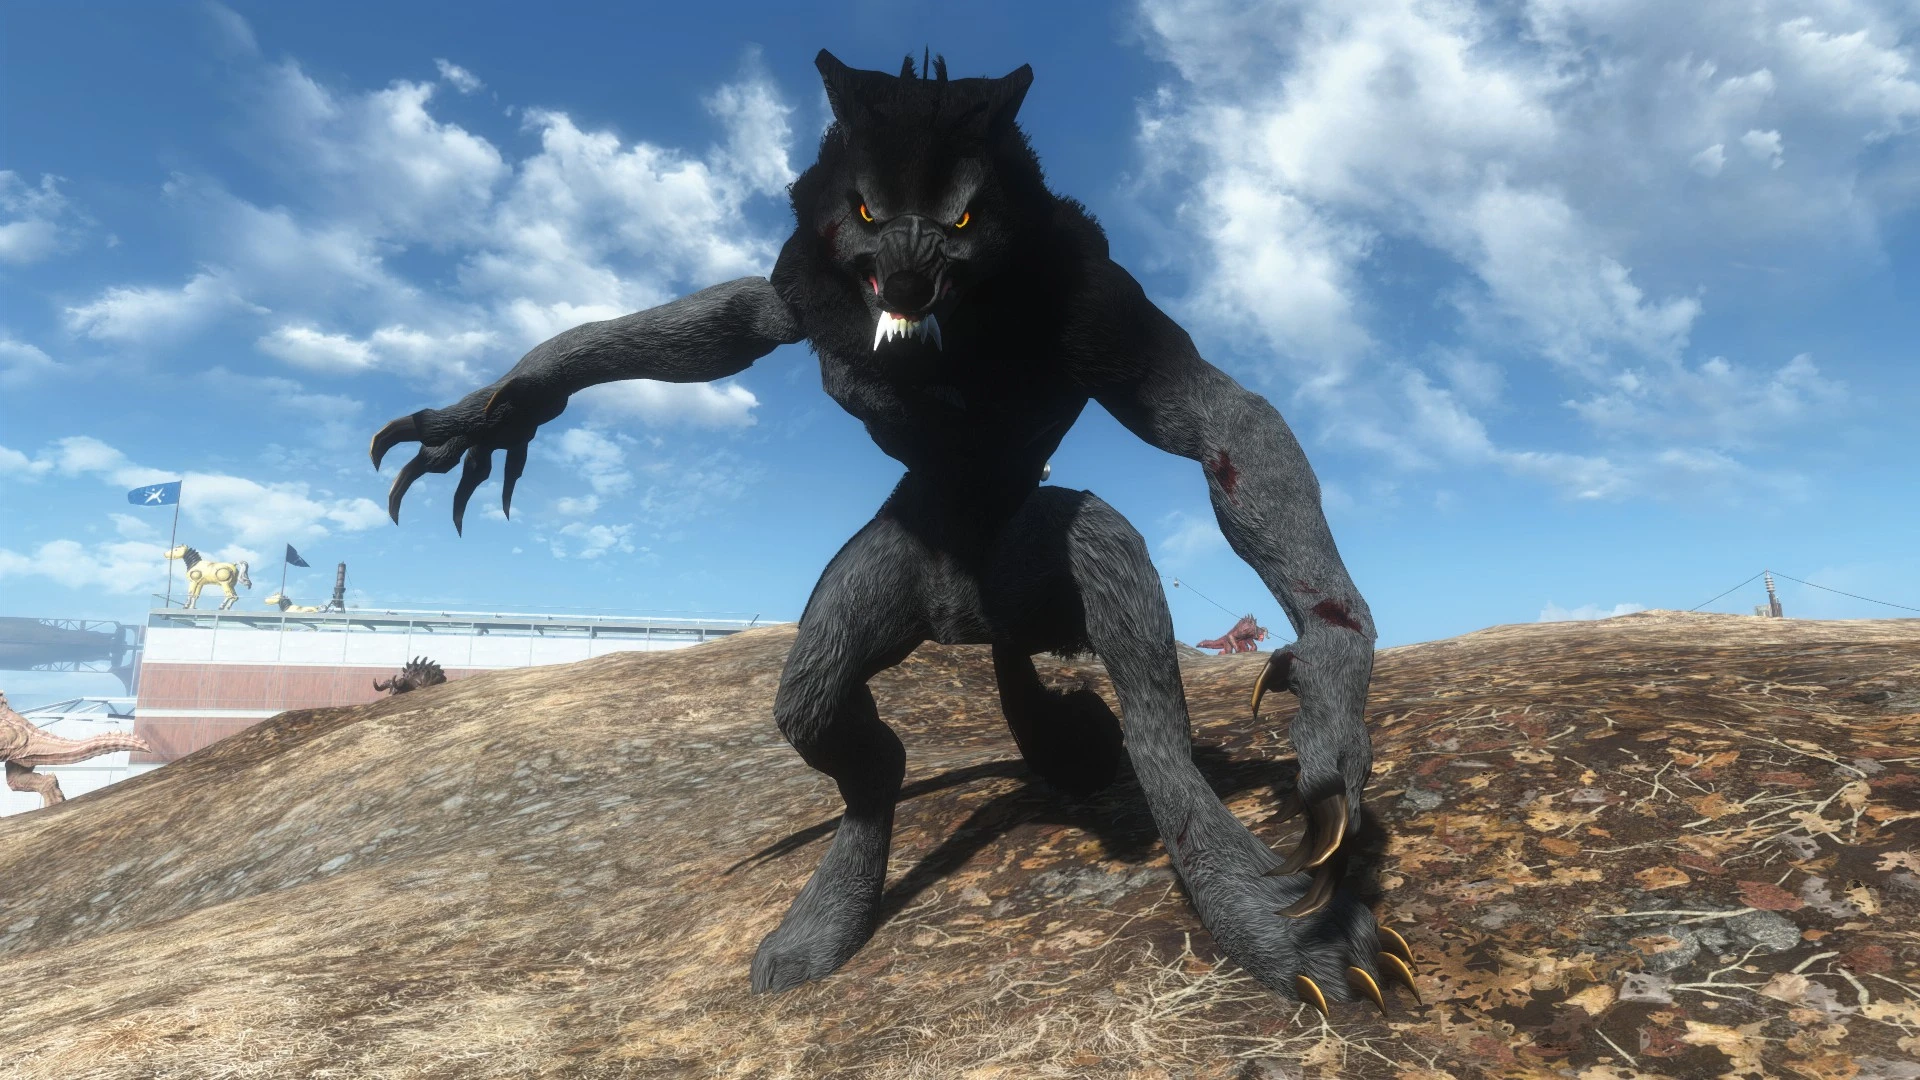 Werewolf Concept V2 at Fallout 4 Nexus - Mods and community